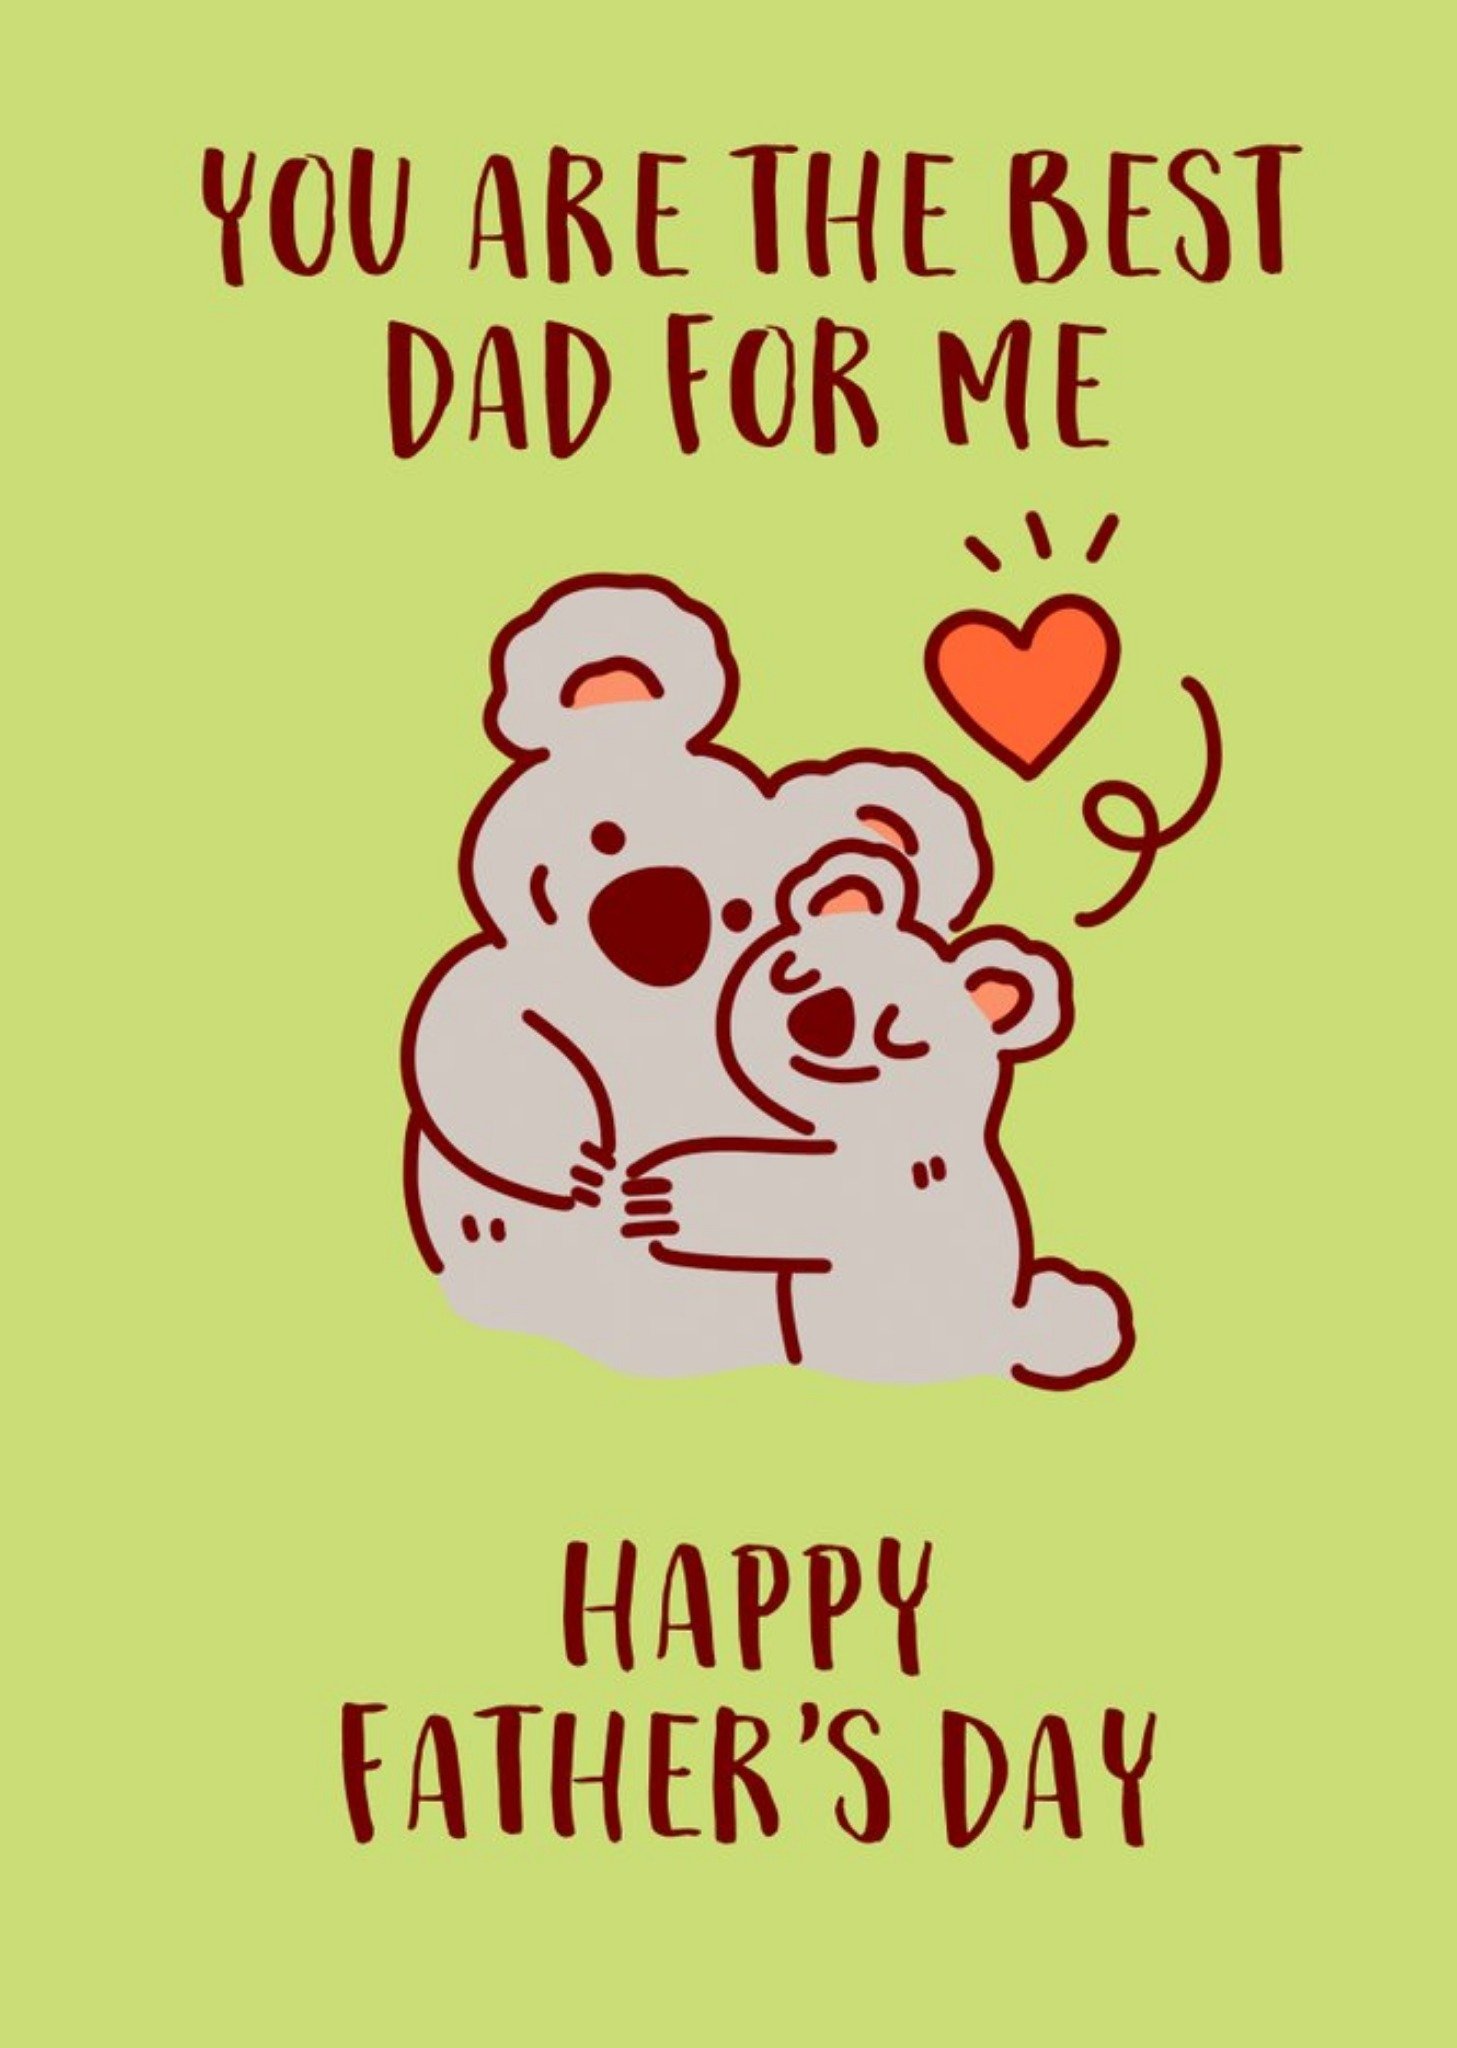 Moonpig Illustrated Koala Best Dad For Me Father's Day Card Ecard